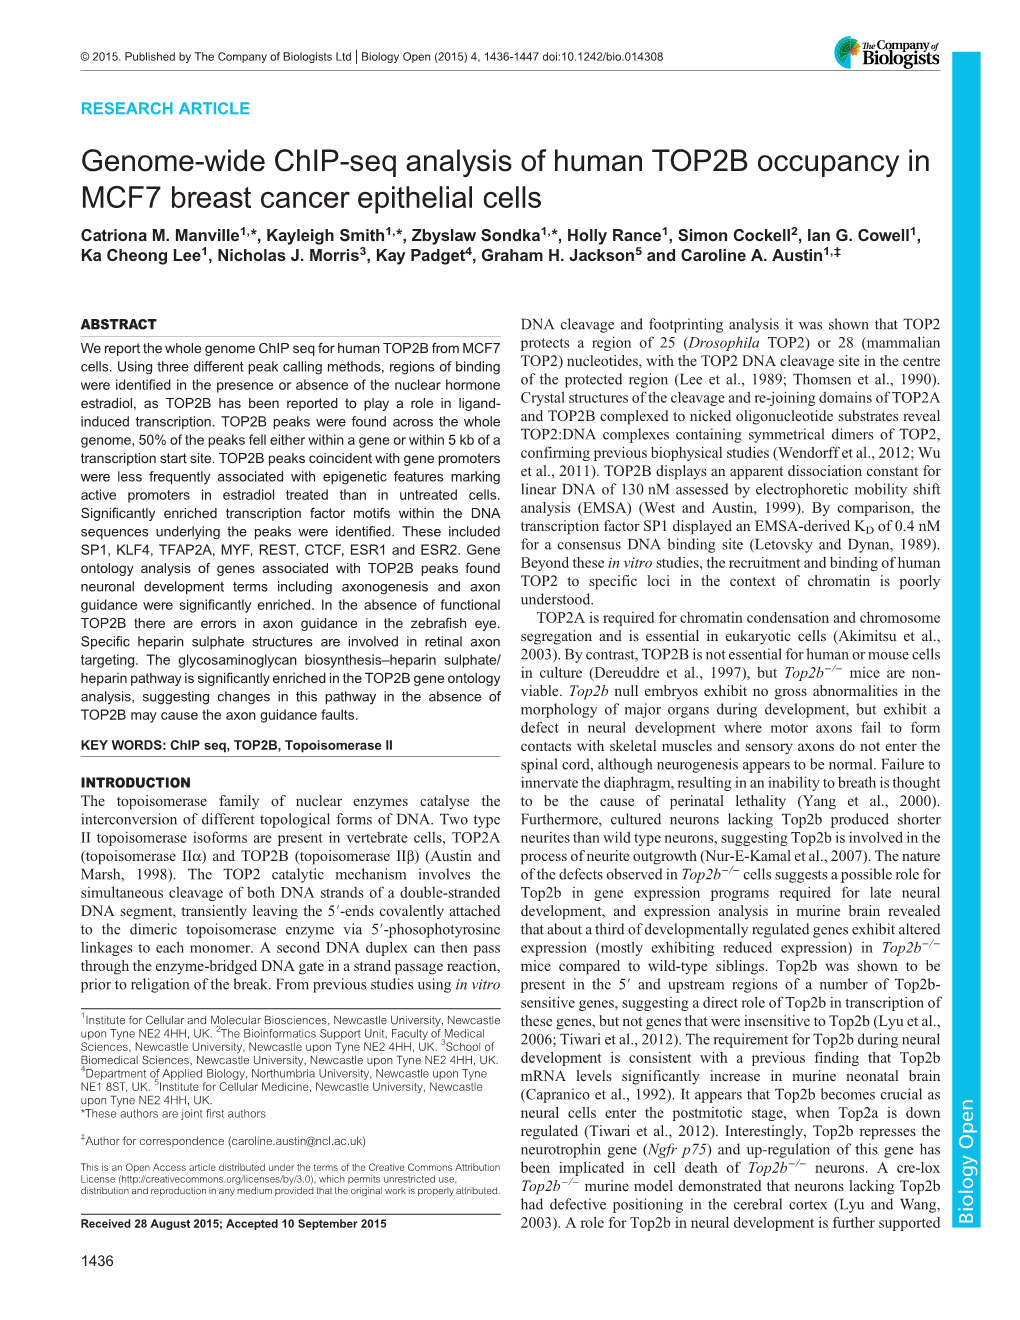 Genome-Wide Chip-Seq Analysis of Human TOP2B Occupancy in MCF7 Breast Cancer Epithelial Cells Catriona M